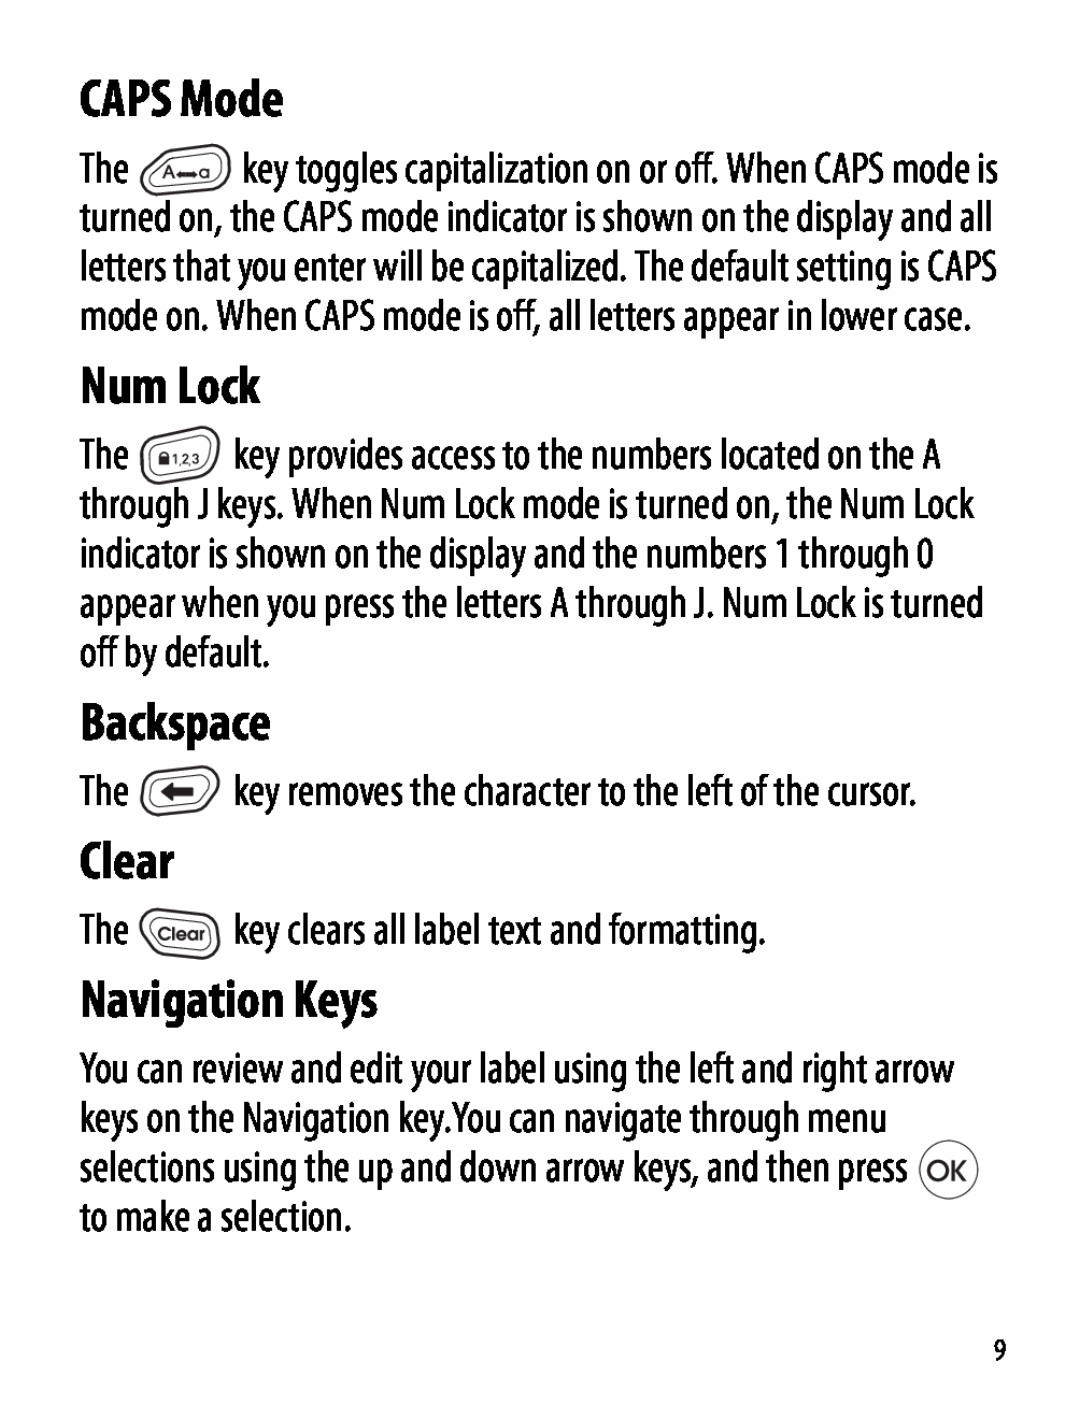 Dymo Labelmaker manual CAPS Mode, Num Lock, Backspace, Clear, Navigation Keys, The key clears all label text and formatting 